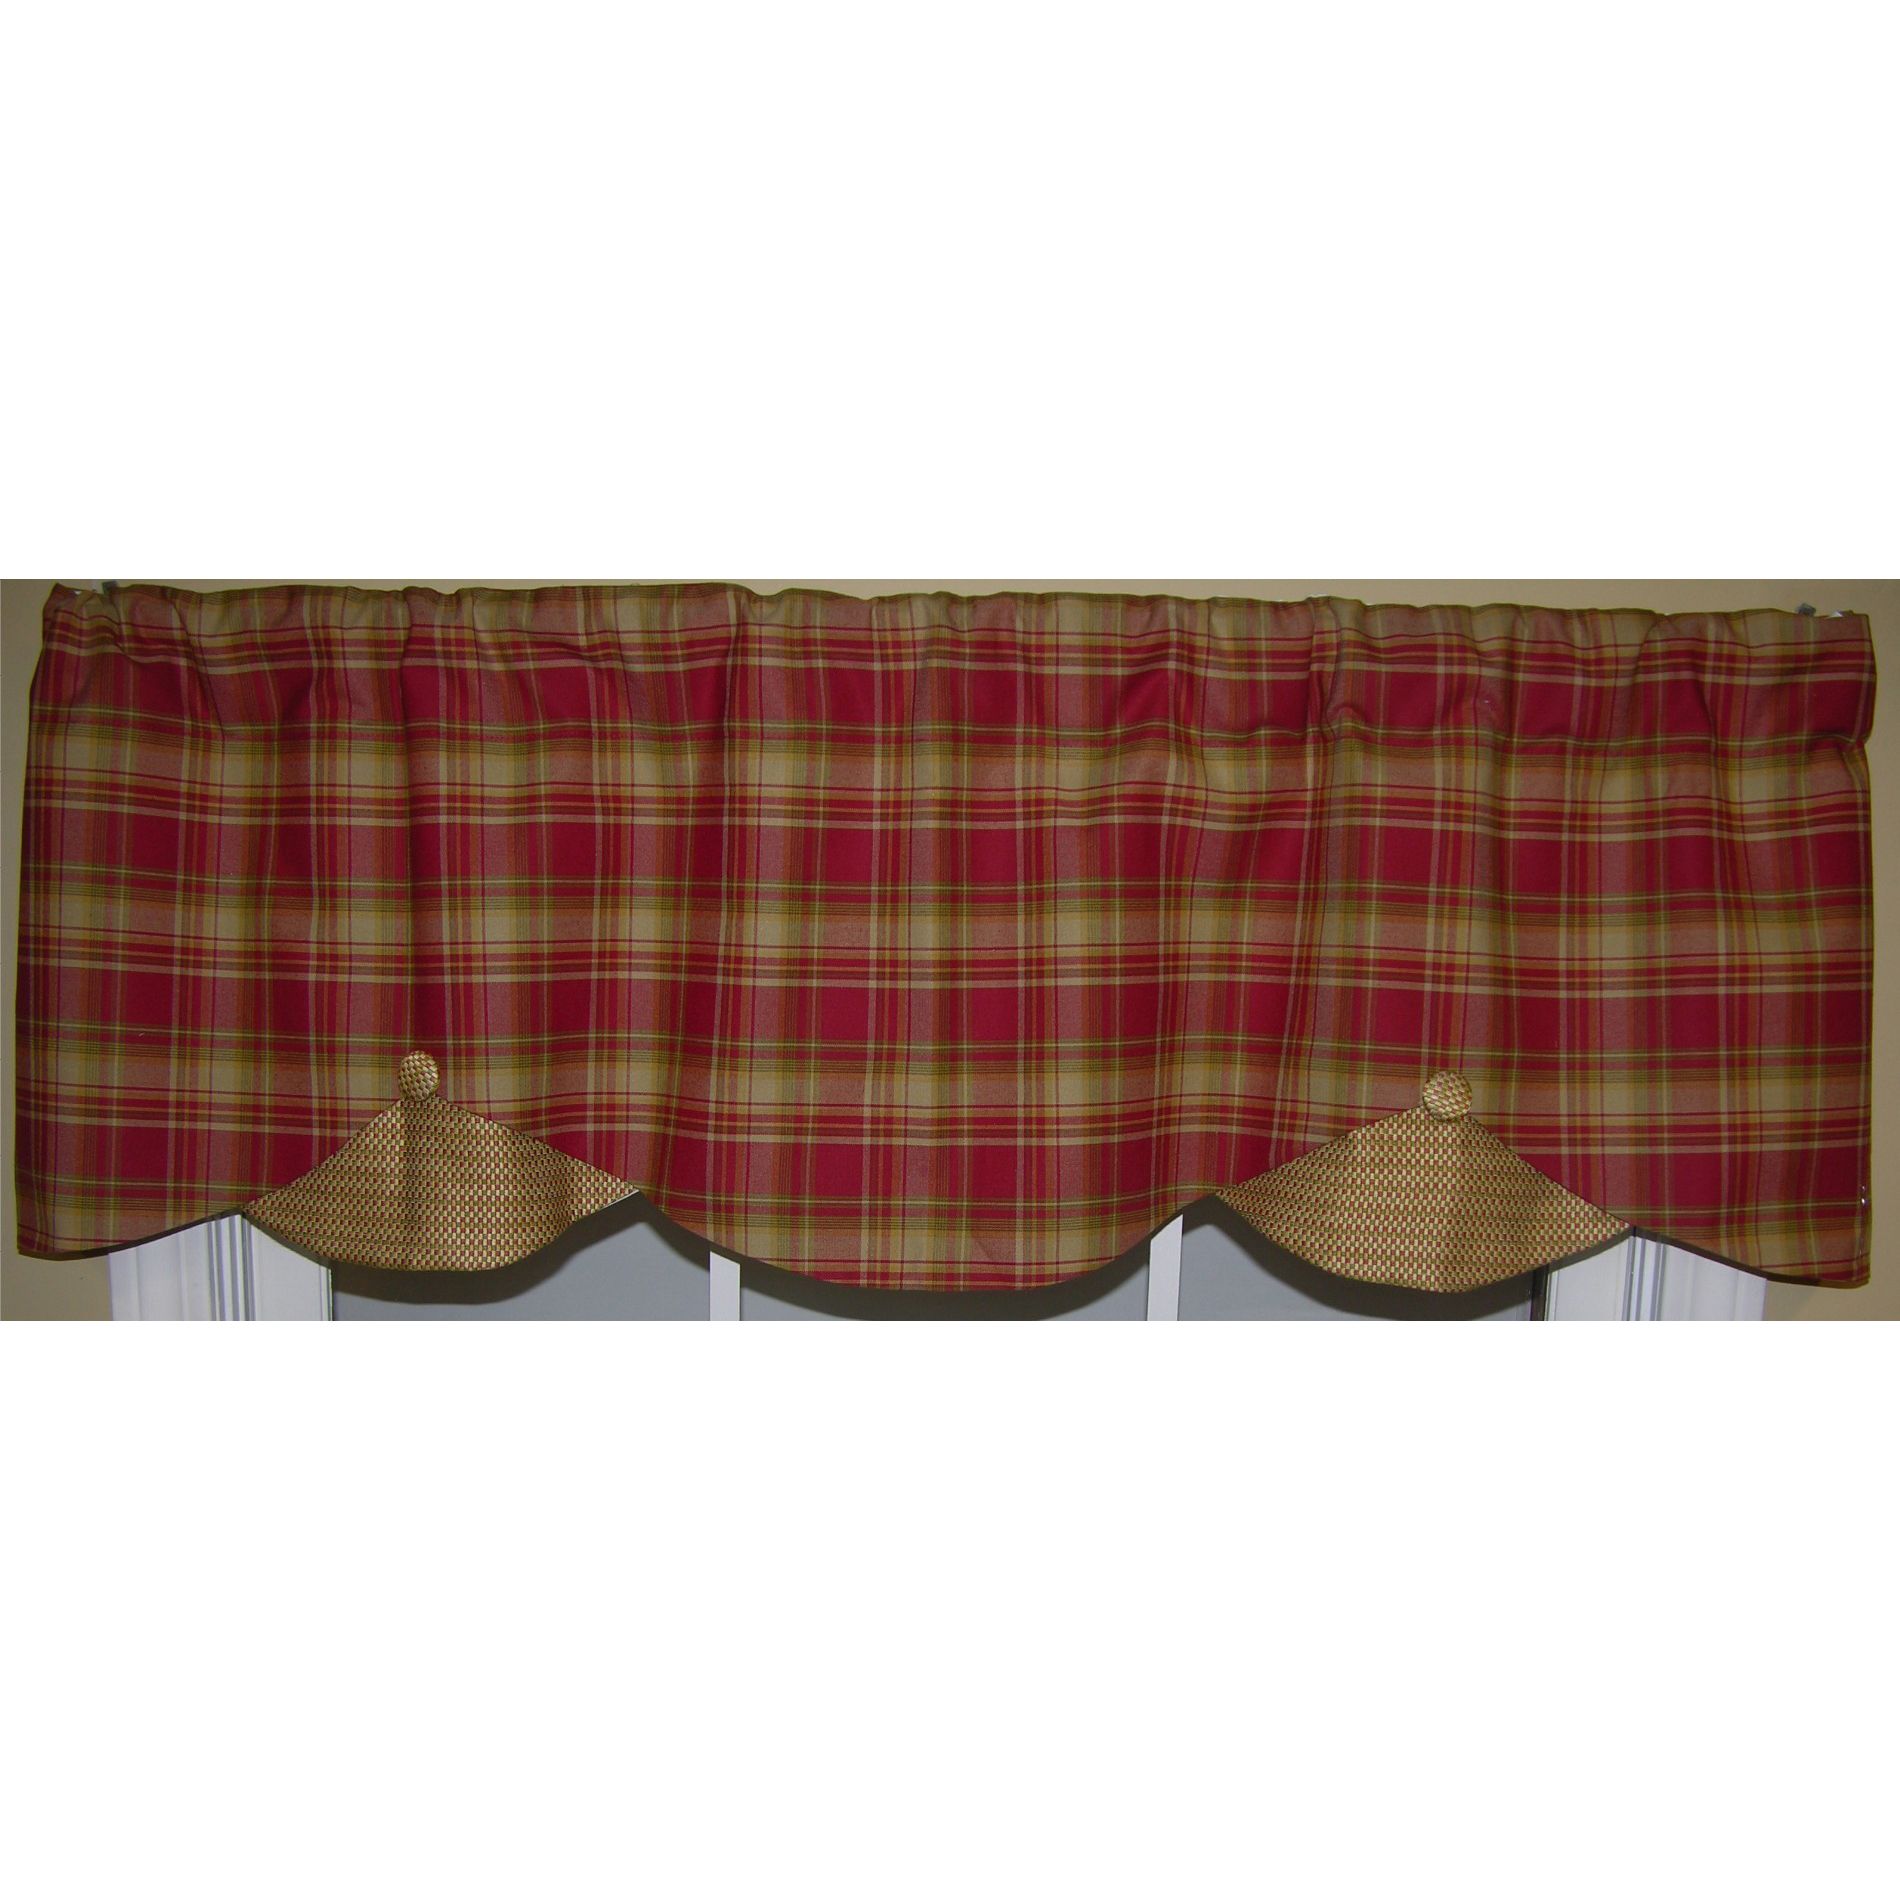 Minicheck Plaid with Covered Cuttons Valance